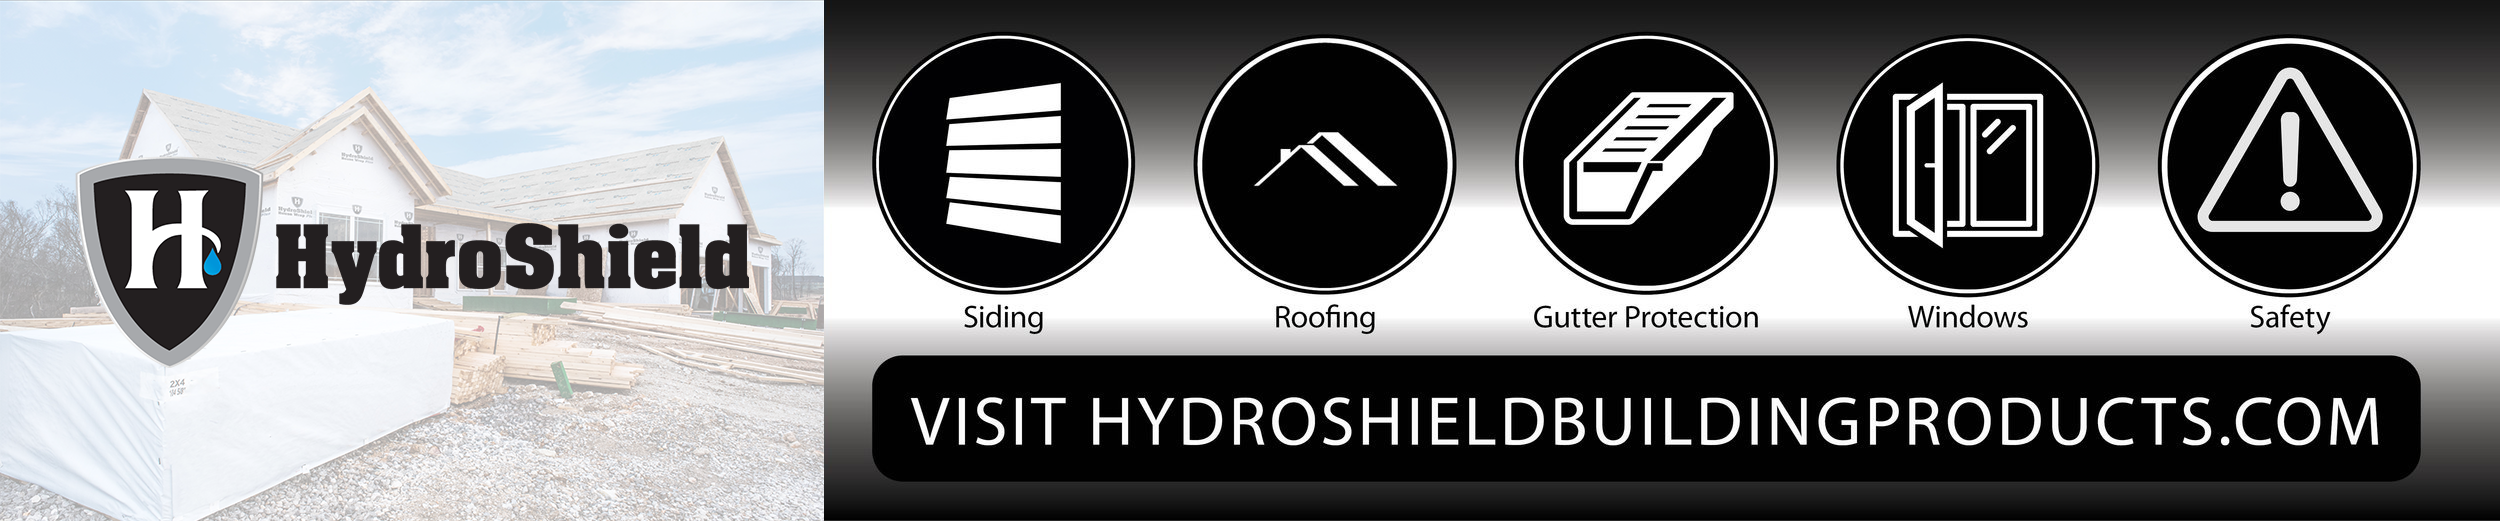 Hydroshield Building Products website banner